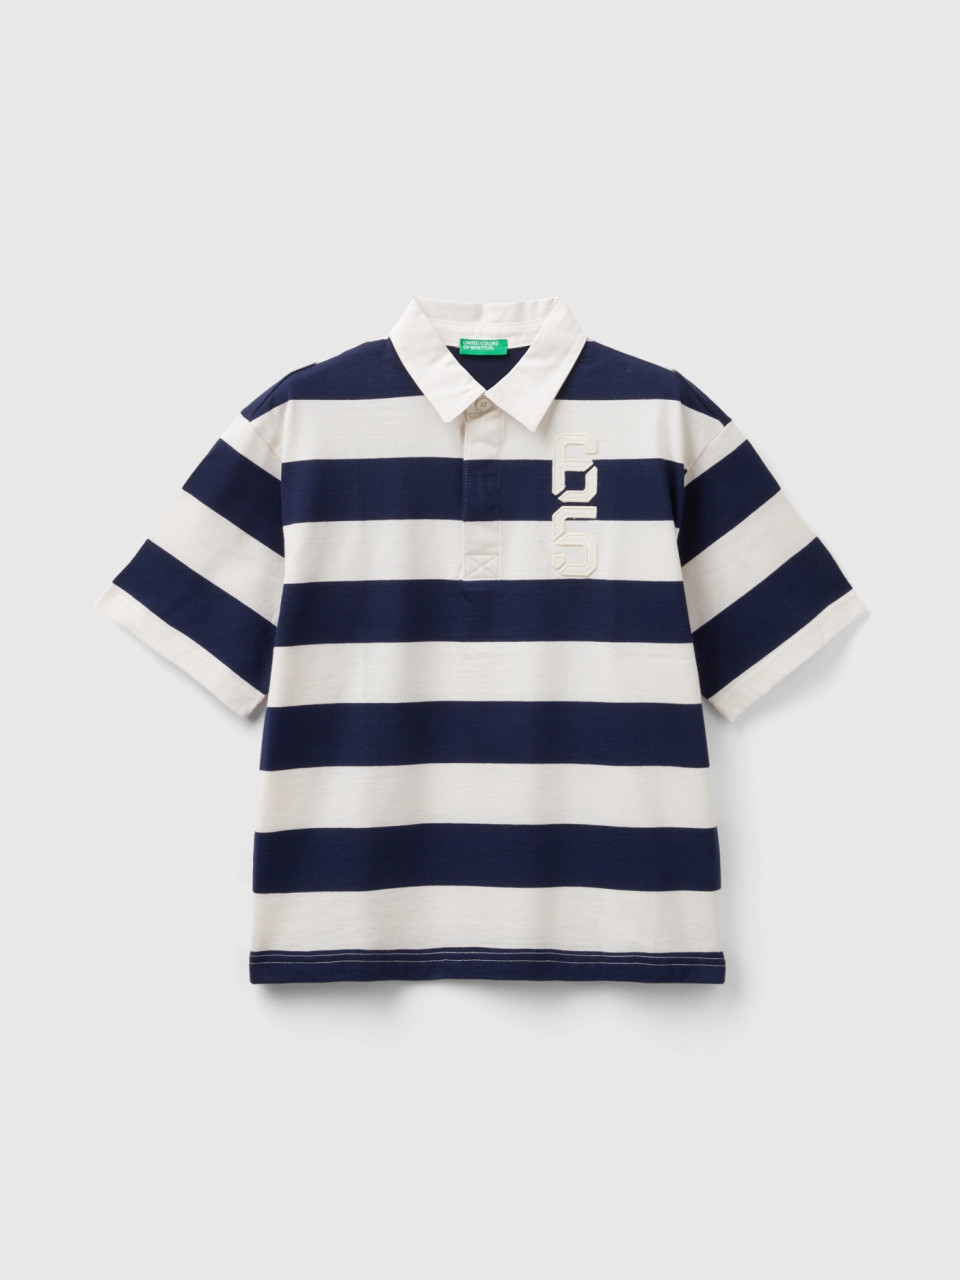 Benetton, Rugby Polo With Patch, Dark Blue, Kids